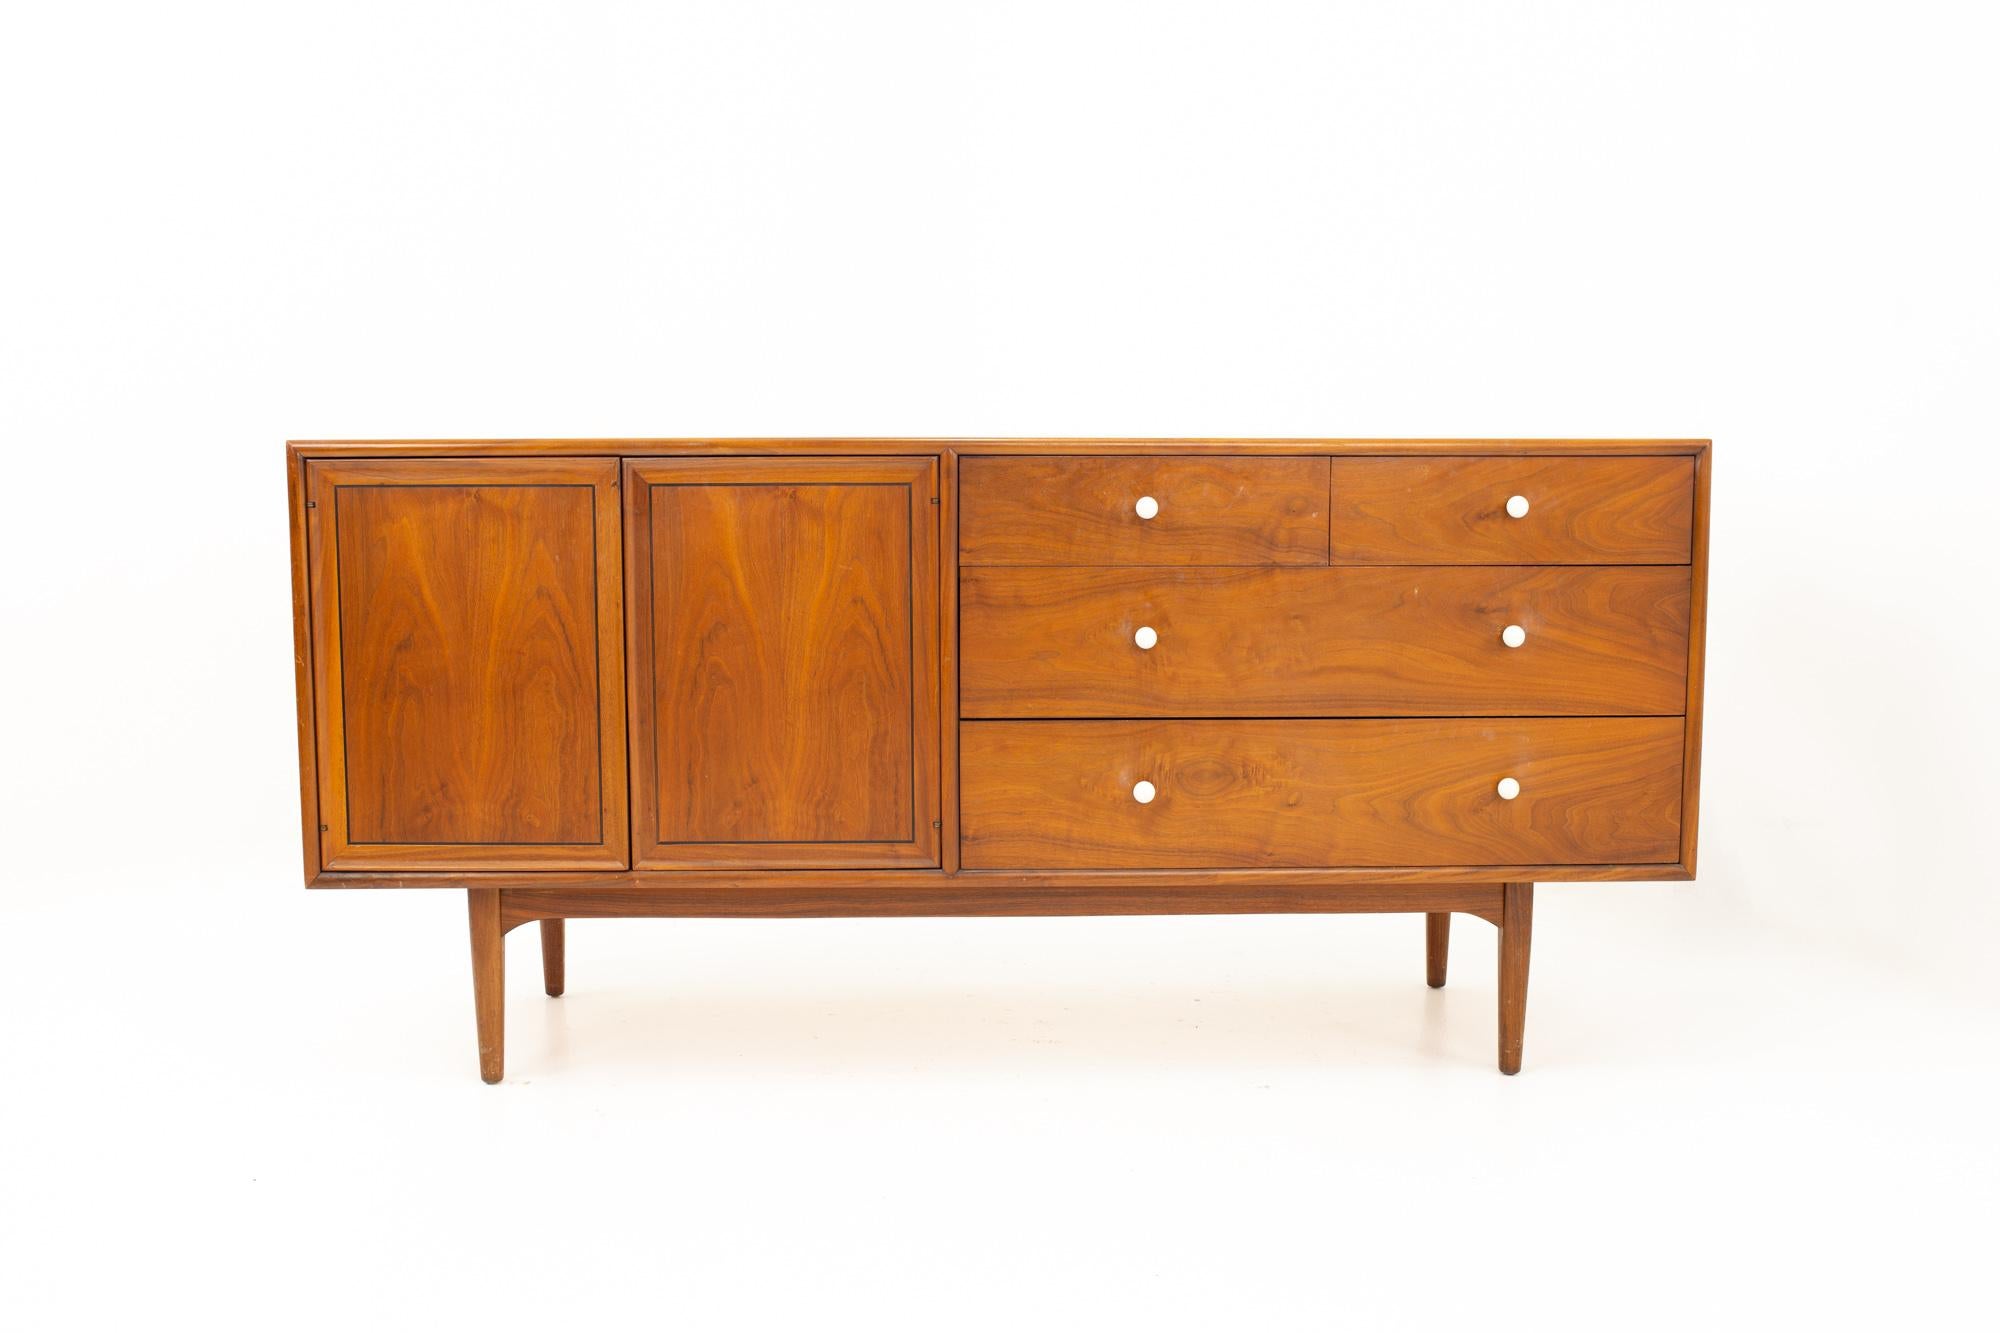 Kipp Stewart for Drexel Declaration Mid Century Walnut Lowboy Dresser

Dresser measures: 66 wide x 20 deep x 31 high

This price includes getting this piece in what we call Restored Vintage Condition. That means the piece is permanently fixed